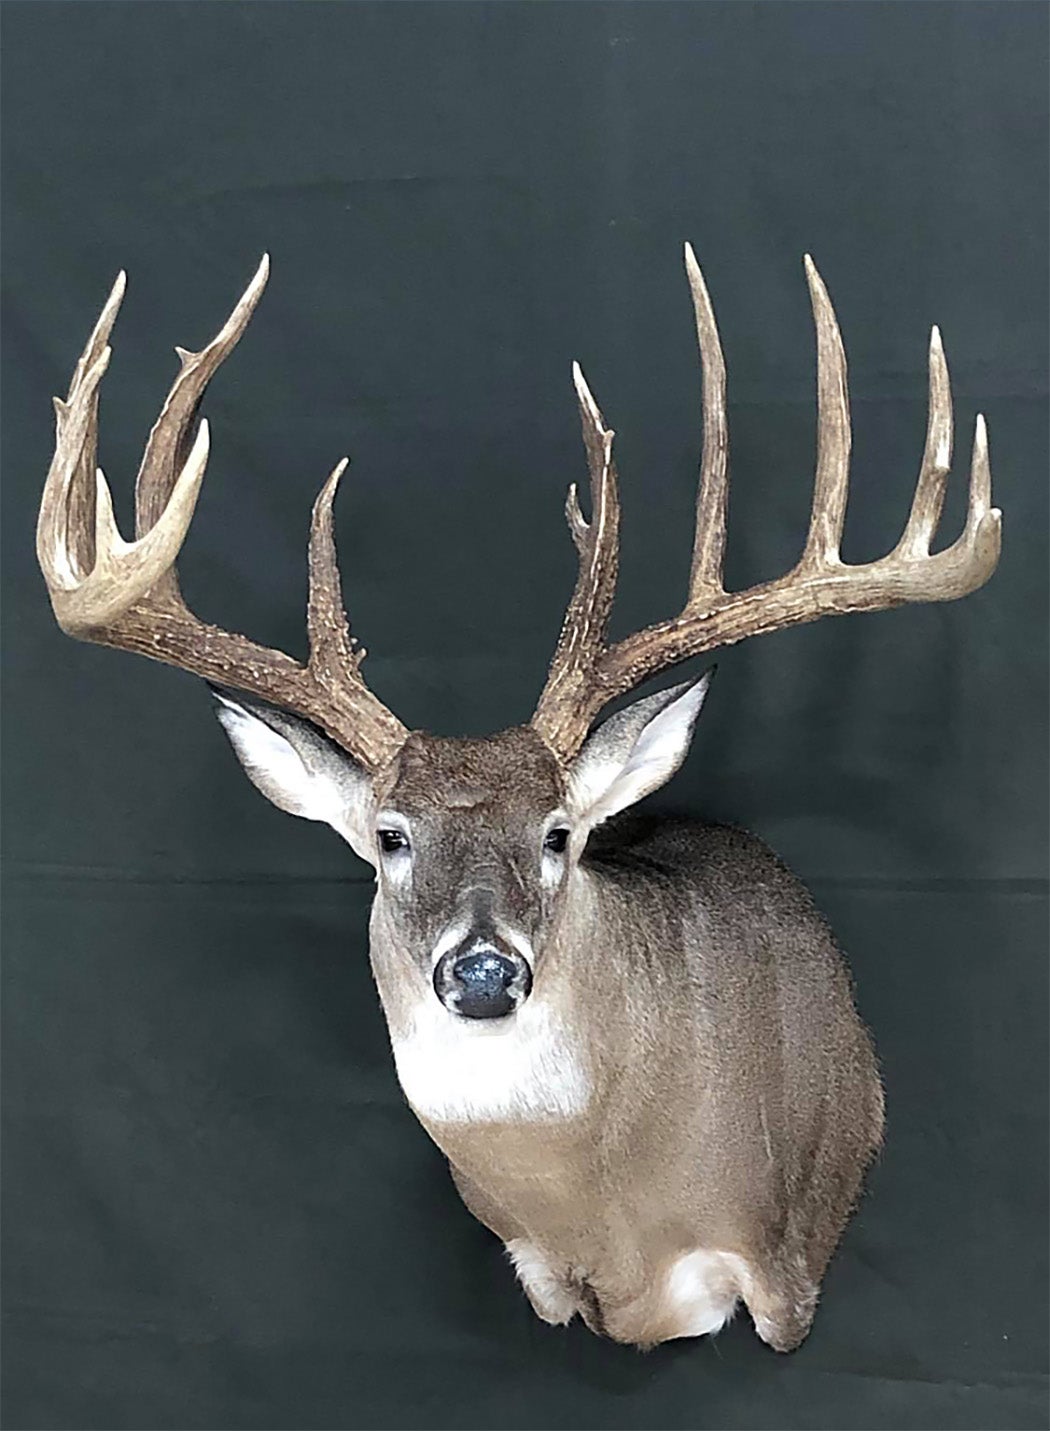 Tennessee Hunter's 47-Point Deer Breaks World Record - The New York Times